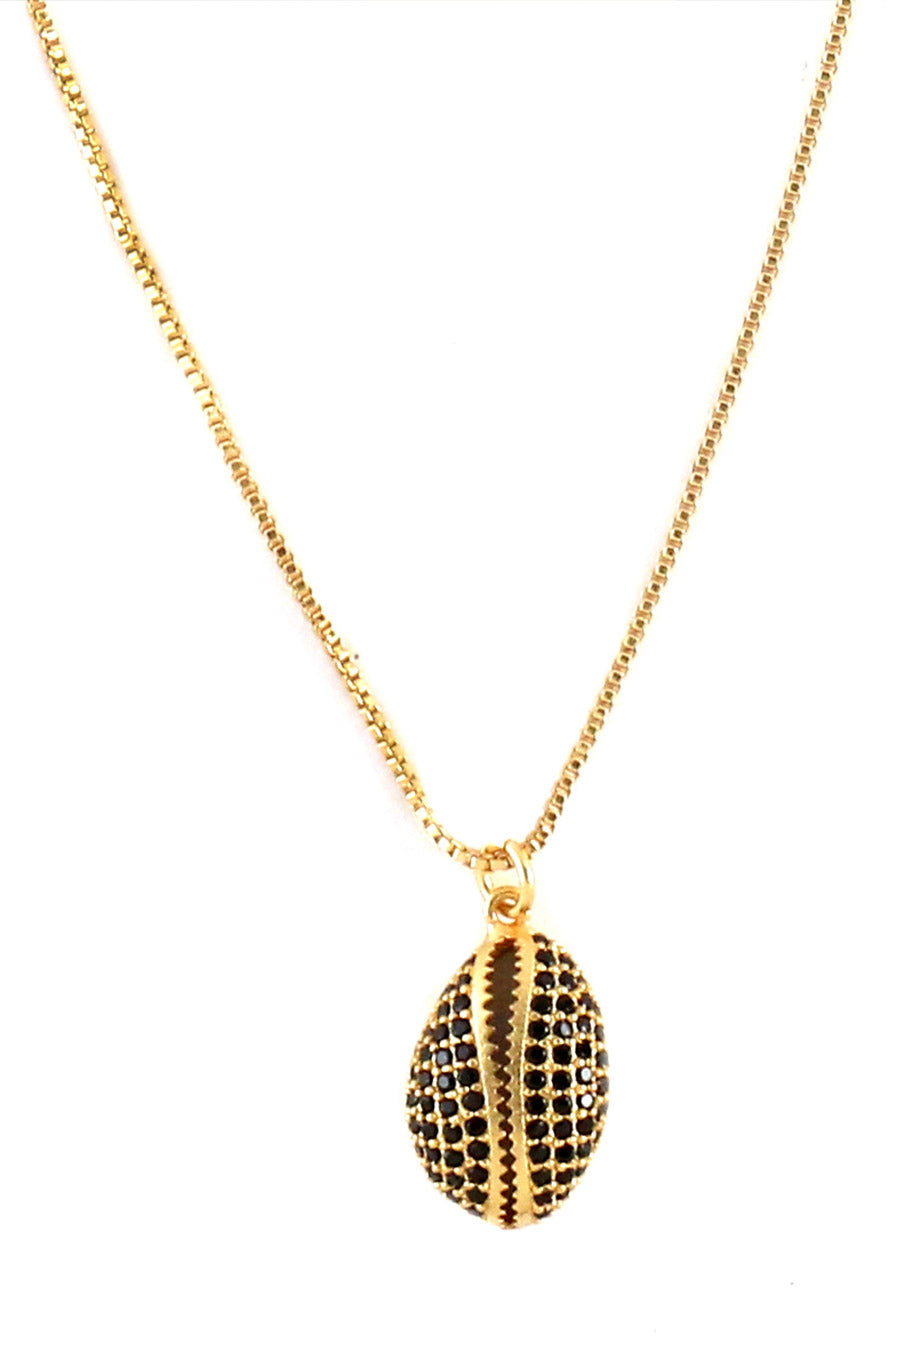 Gold Plated Shell Necklace